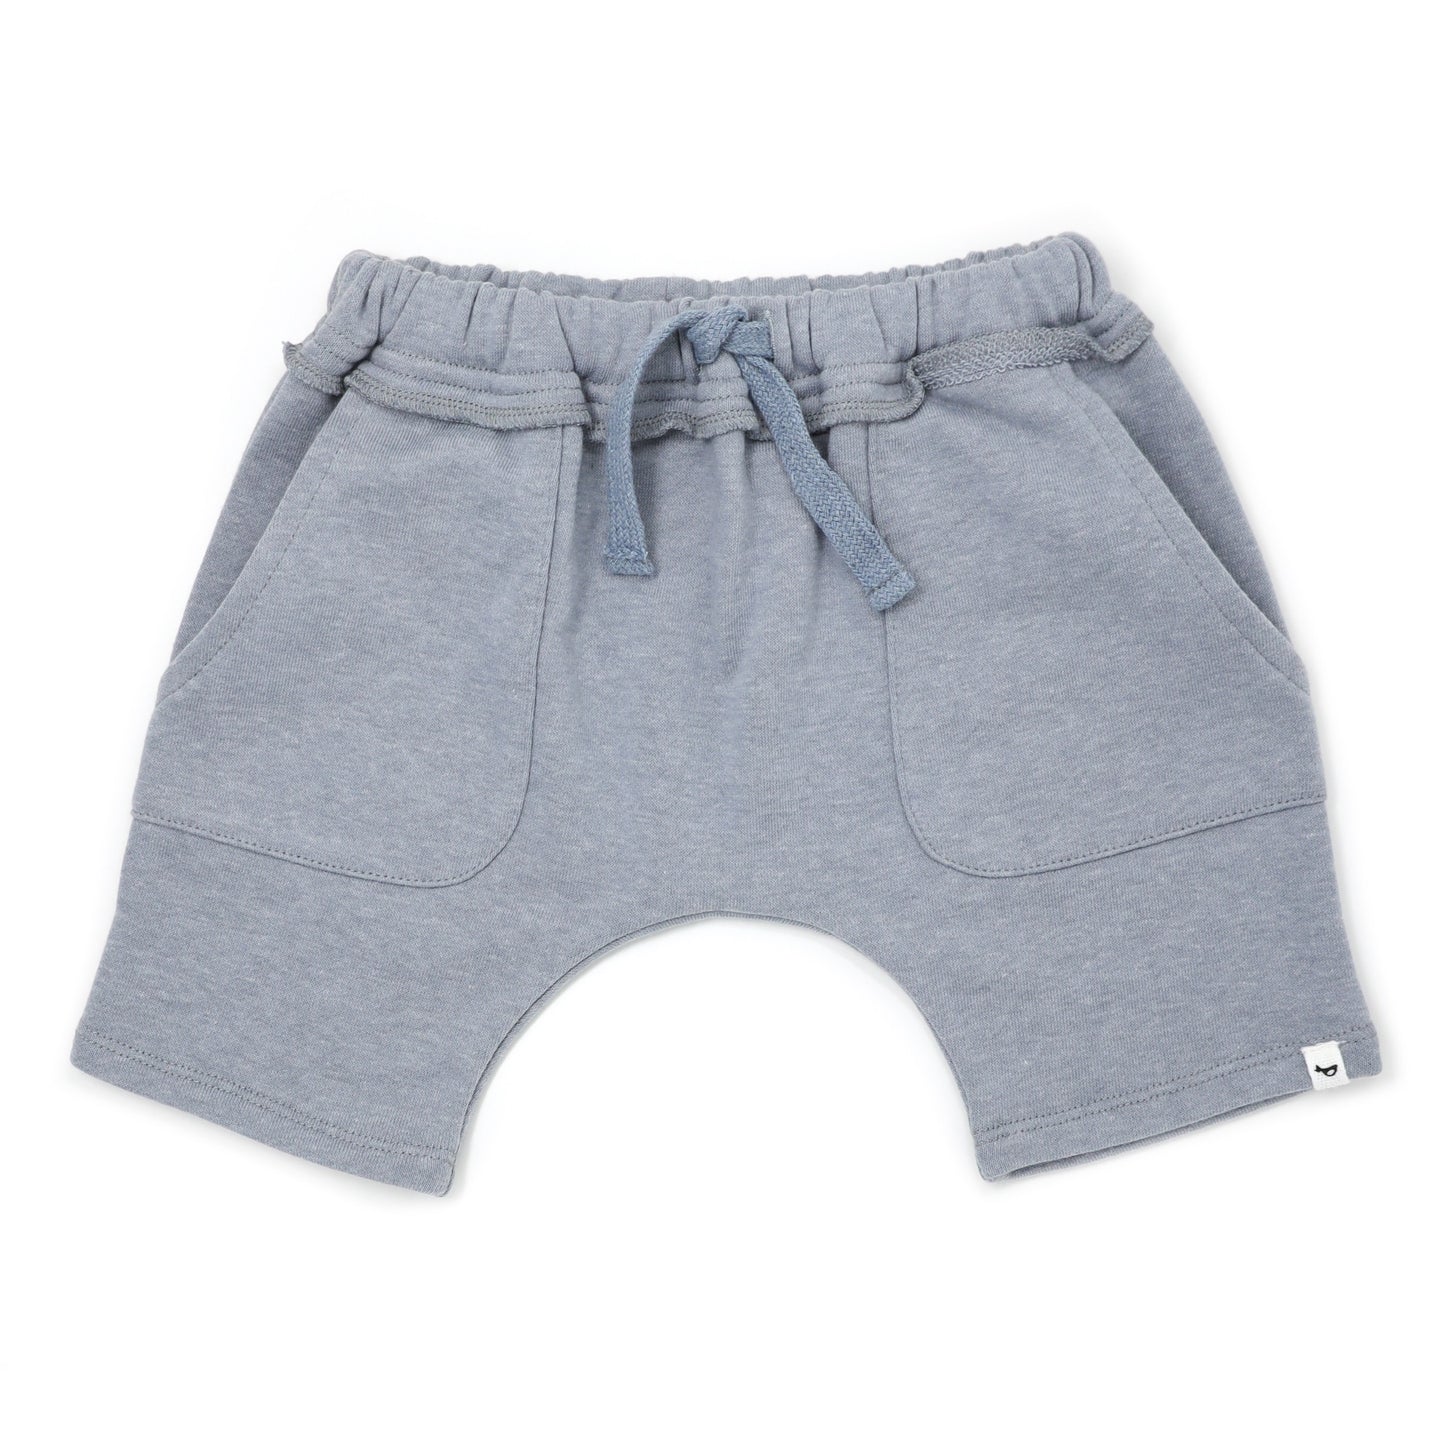 Cotton French Terry Pocket Short